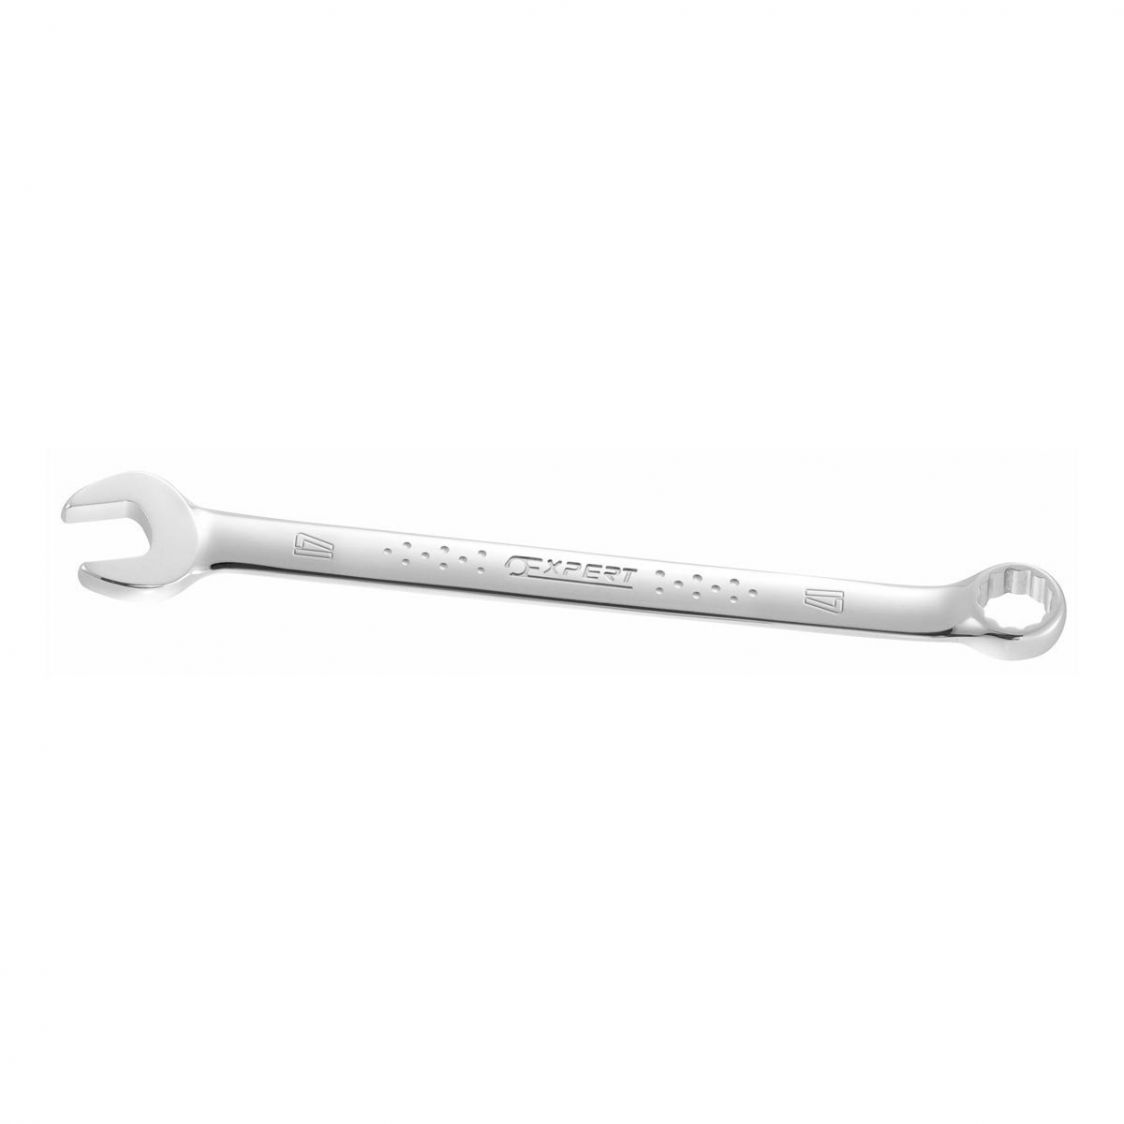 EXPERT by FACOM E110711 - 18mm Metric Long Combination Spanner